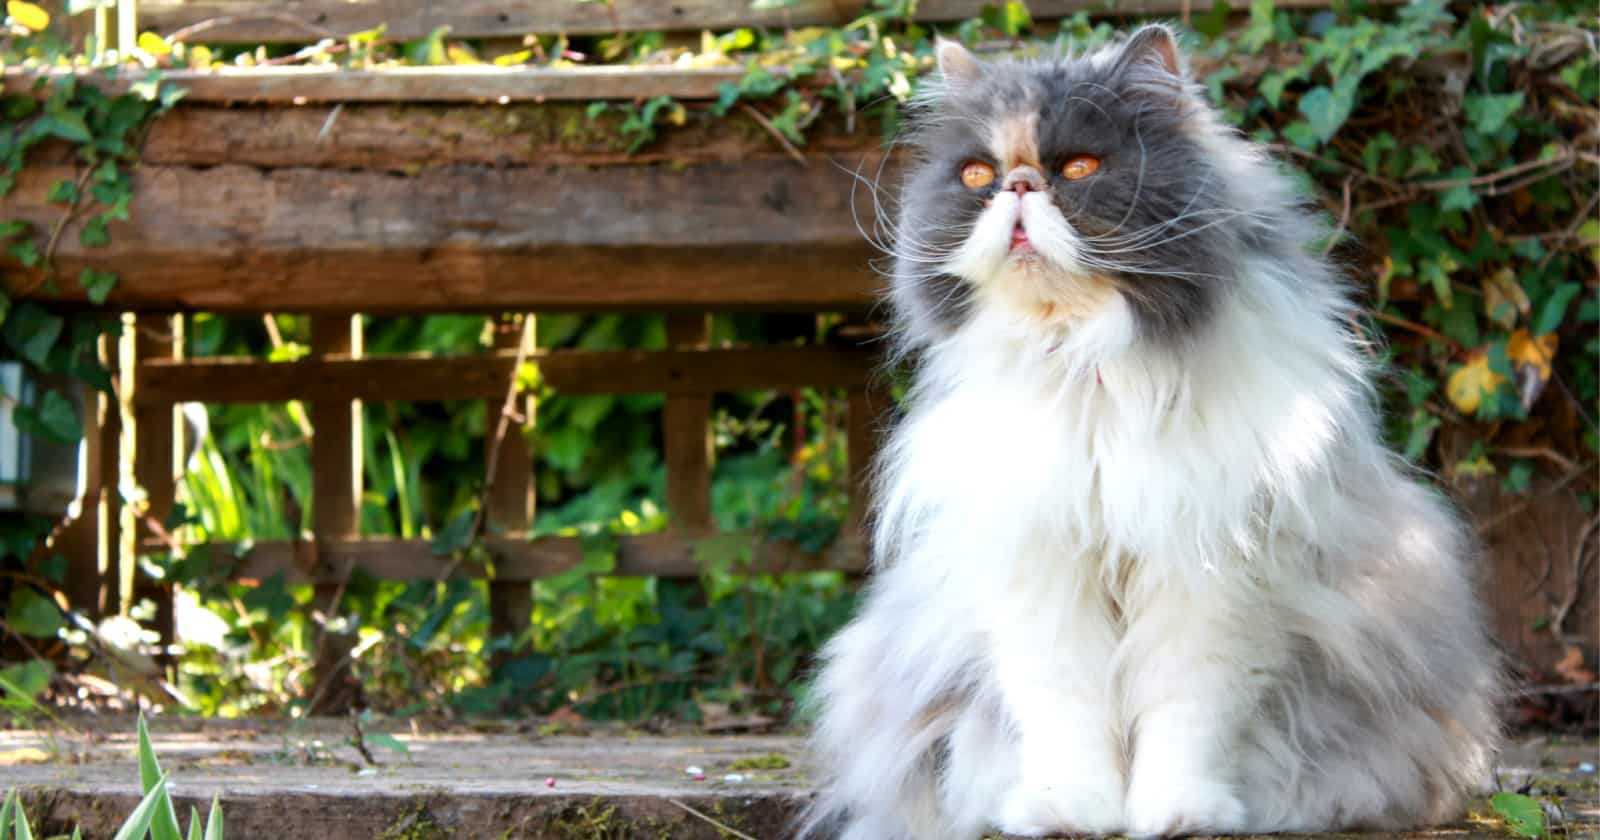 Curious about the most sought-after cat breeds? These 10 kitties really capture the hearts of everyone who meets them, making them the most popular of all!